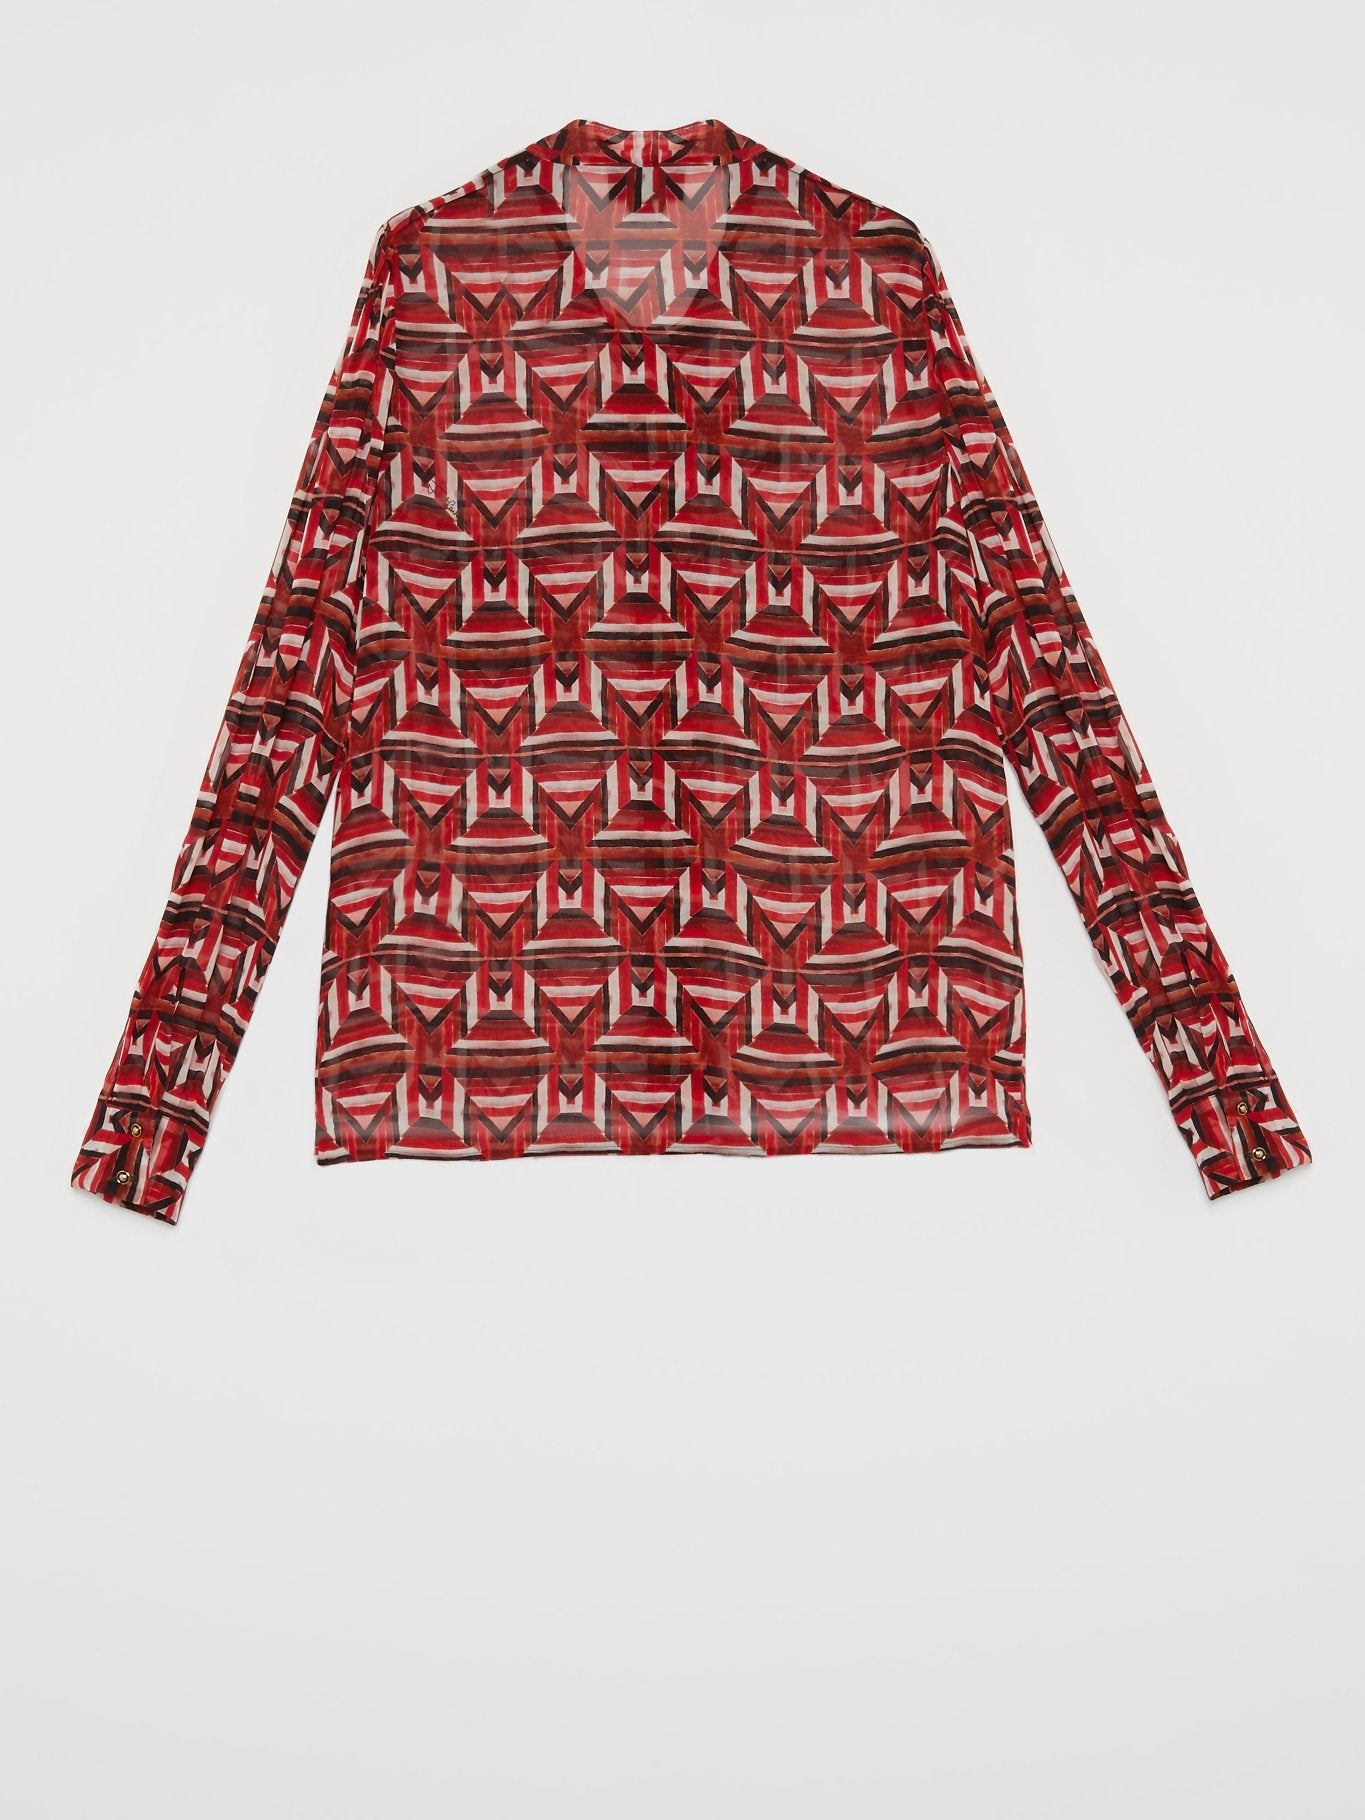 Red Pattern Print Bow Tie Shirt